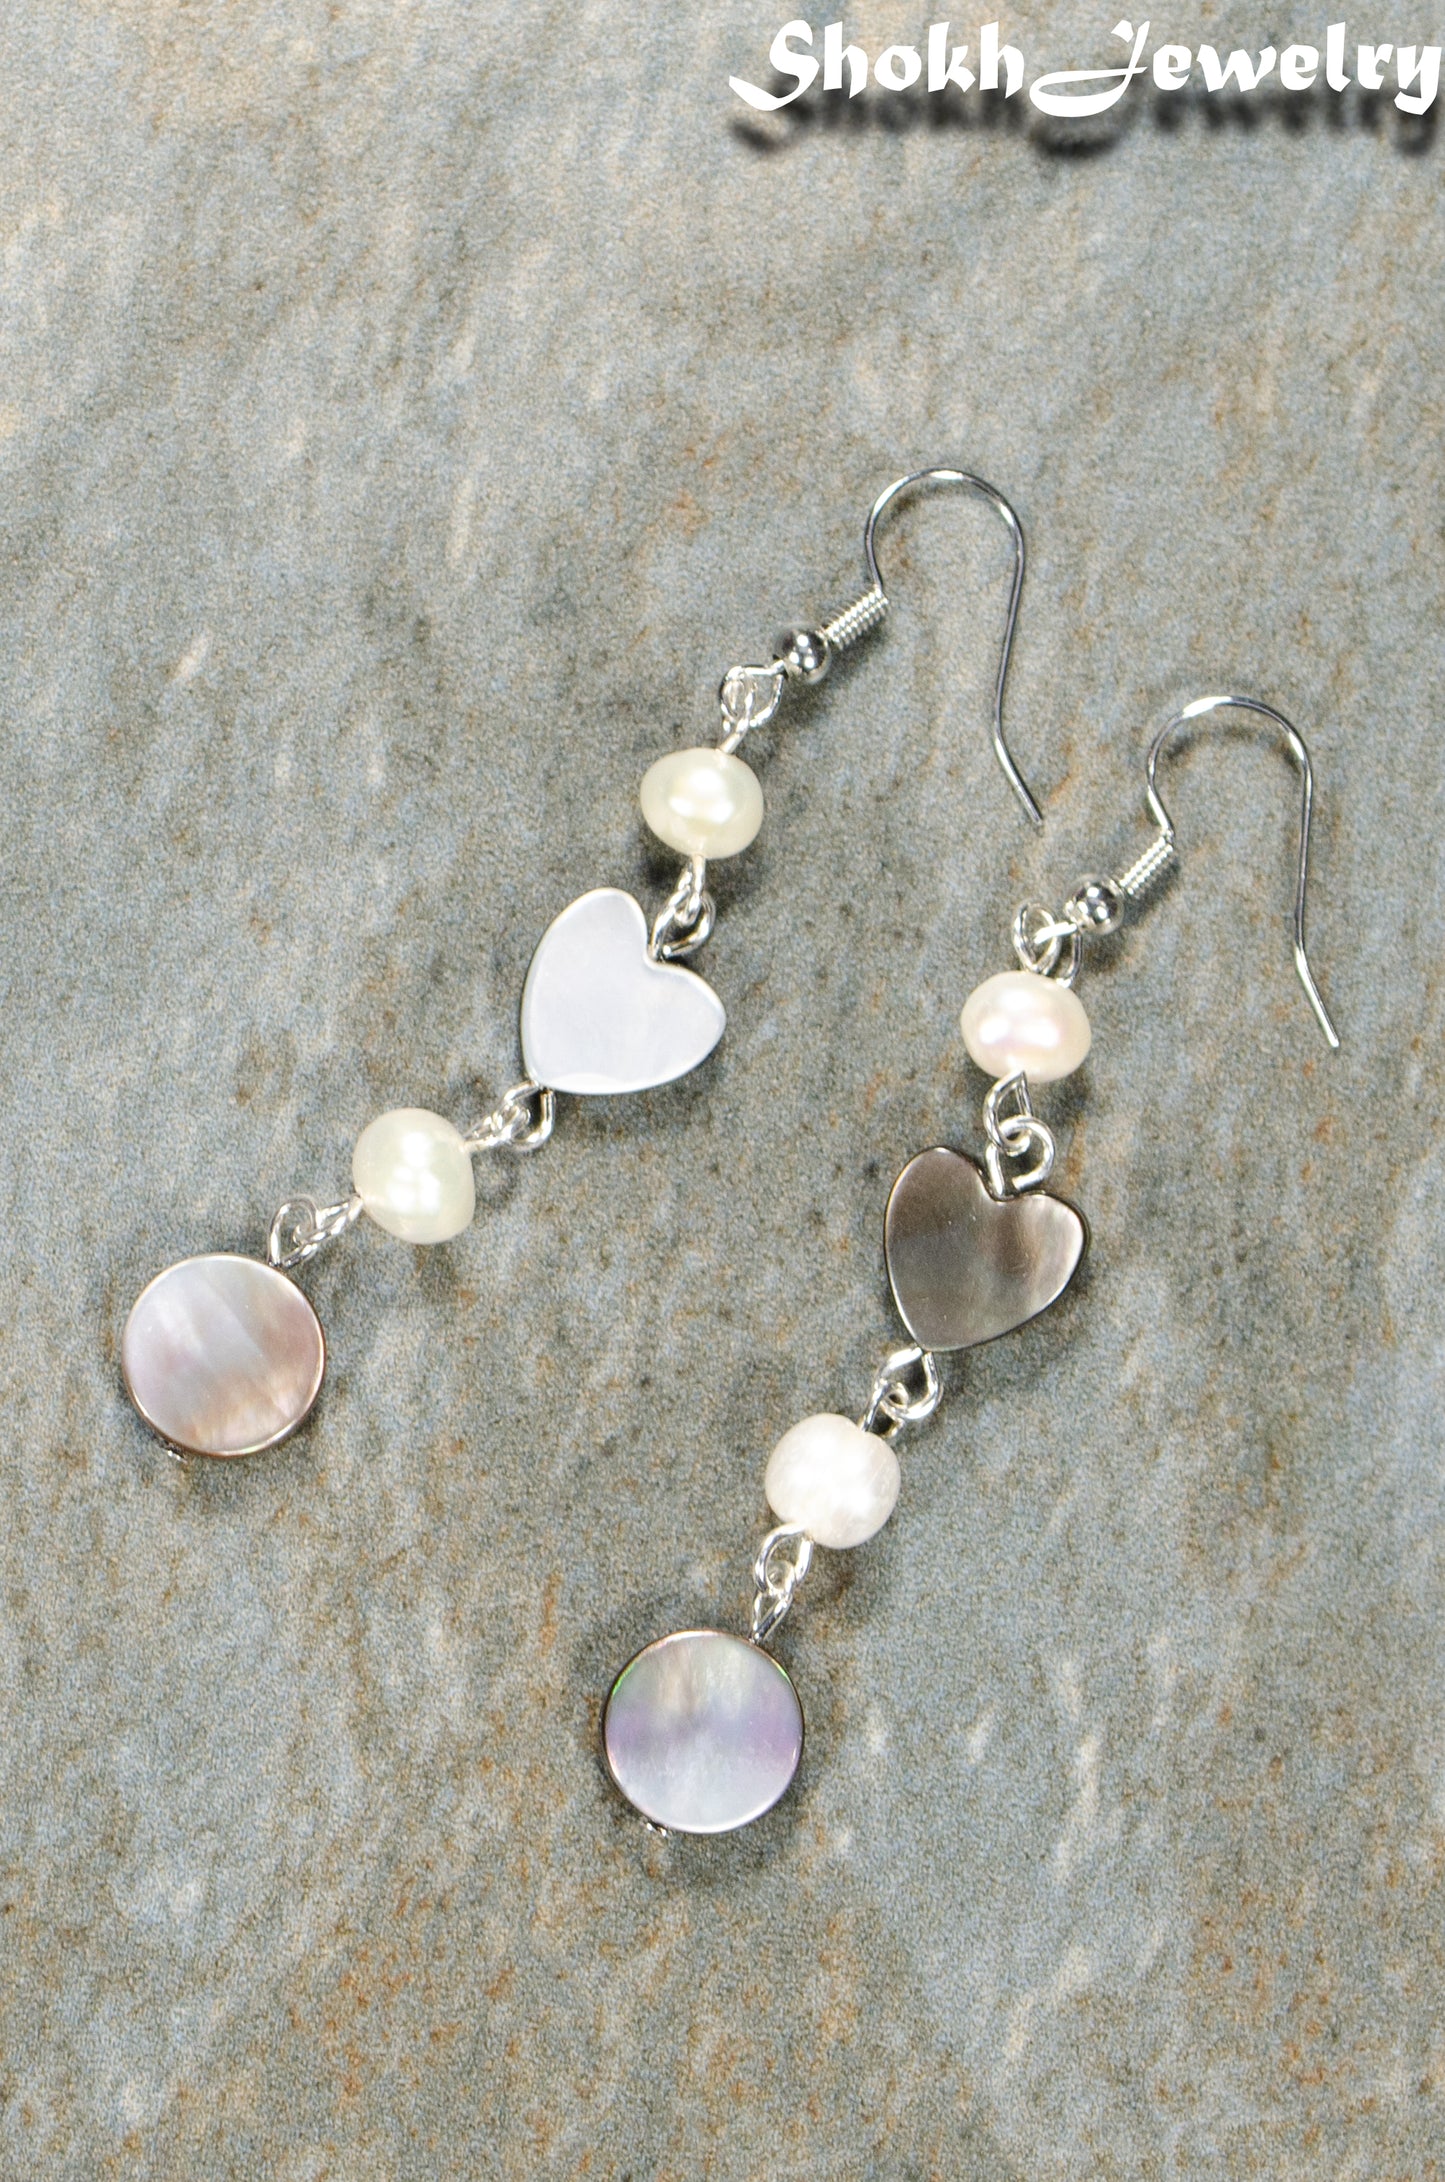 Top view of Long Grey Seashell and Freshwater Pearl Earrings.